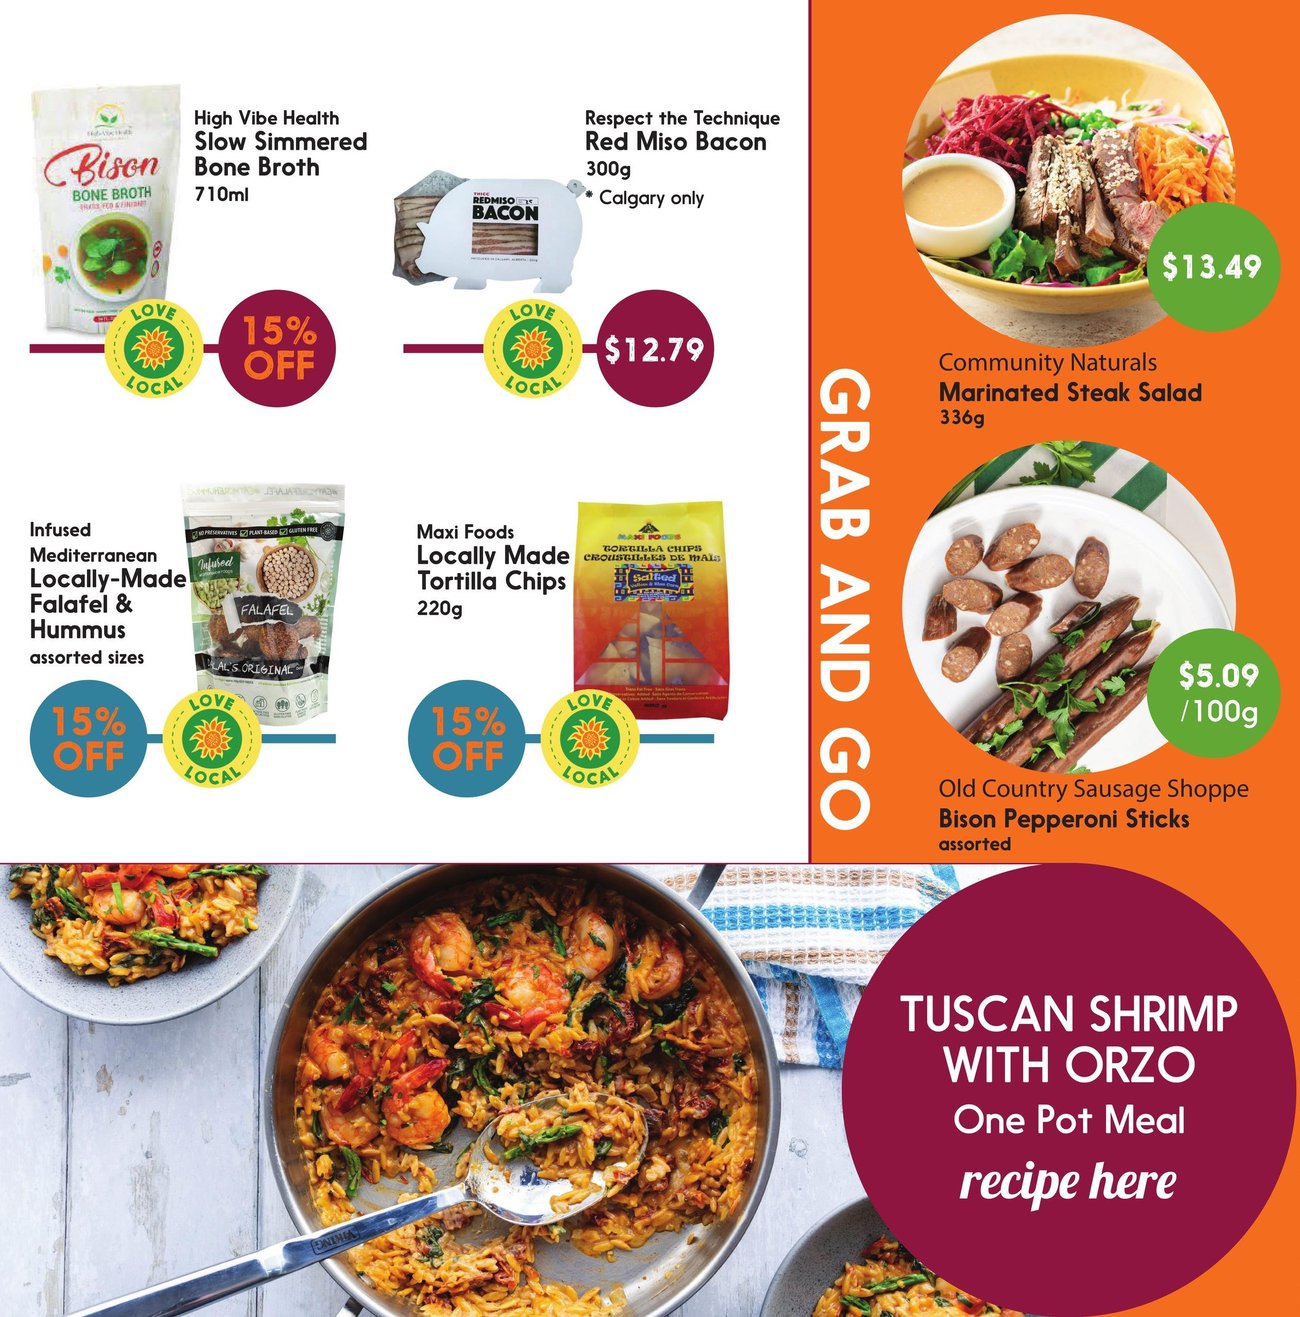 Community Natural Foods - Monthly Savings - Page 7